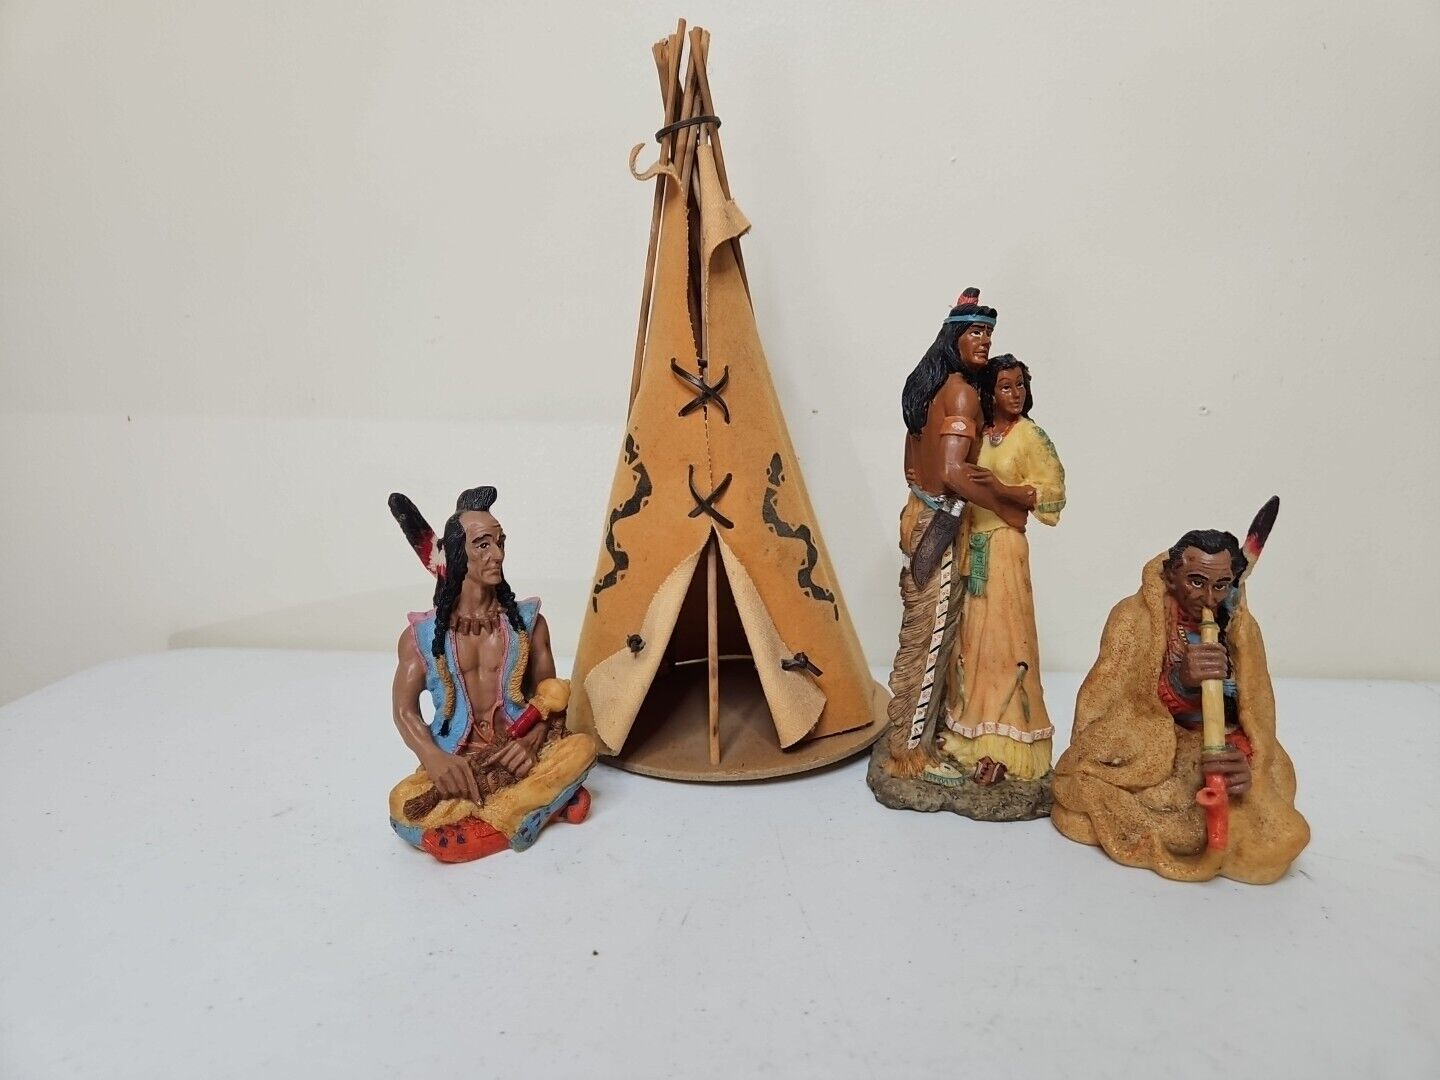 VTG YOUNGS  Native American Indian Family Teepee Tipi Sculpture Set